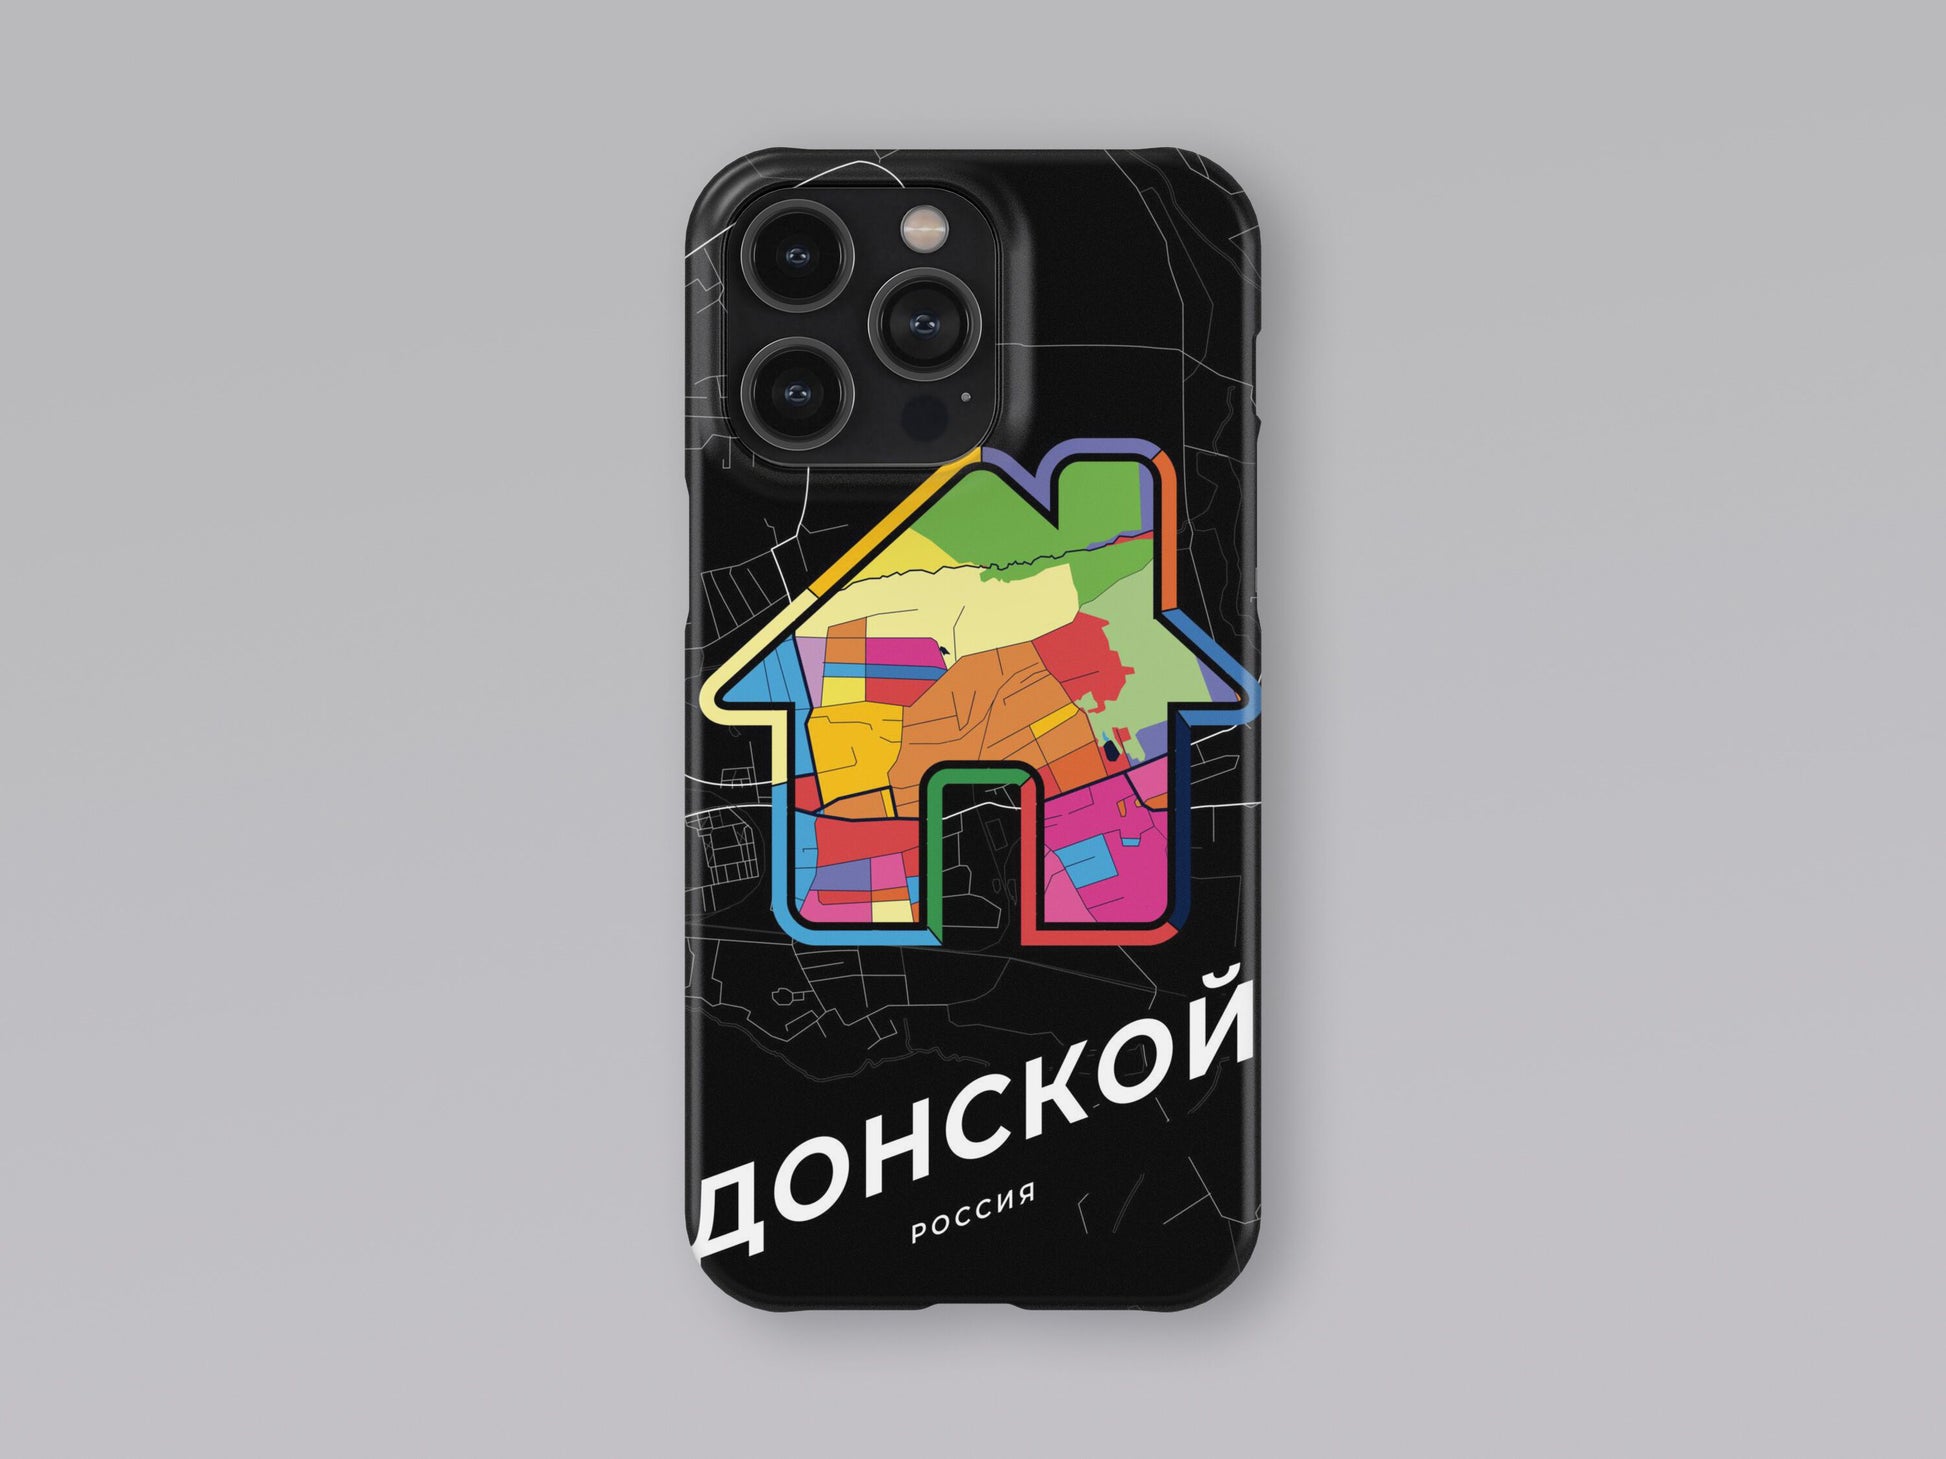 Donskoy Russia slim phone case with colorful icon. Birthday, wedding or housewarming gift. Couple match cases. 3